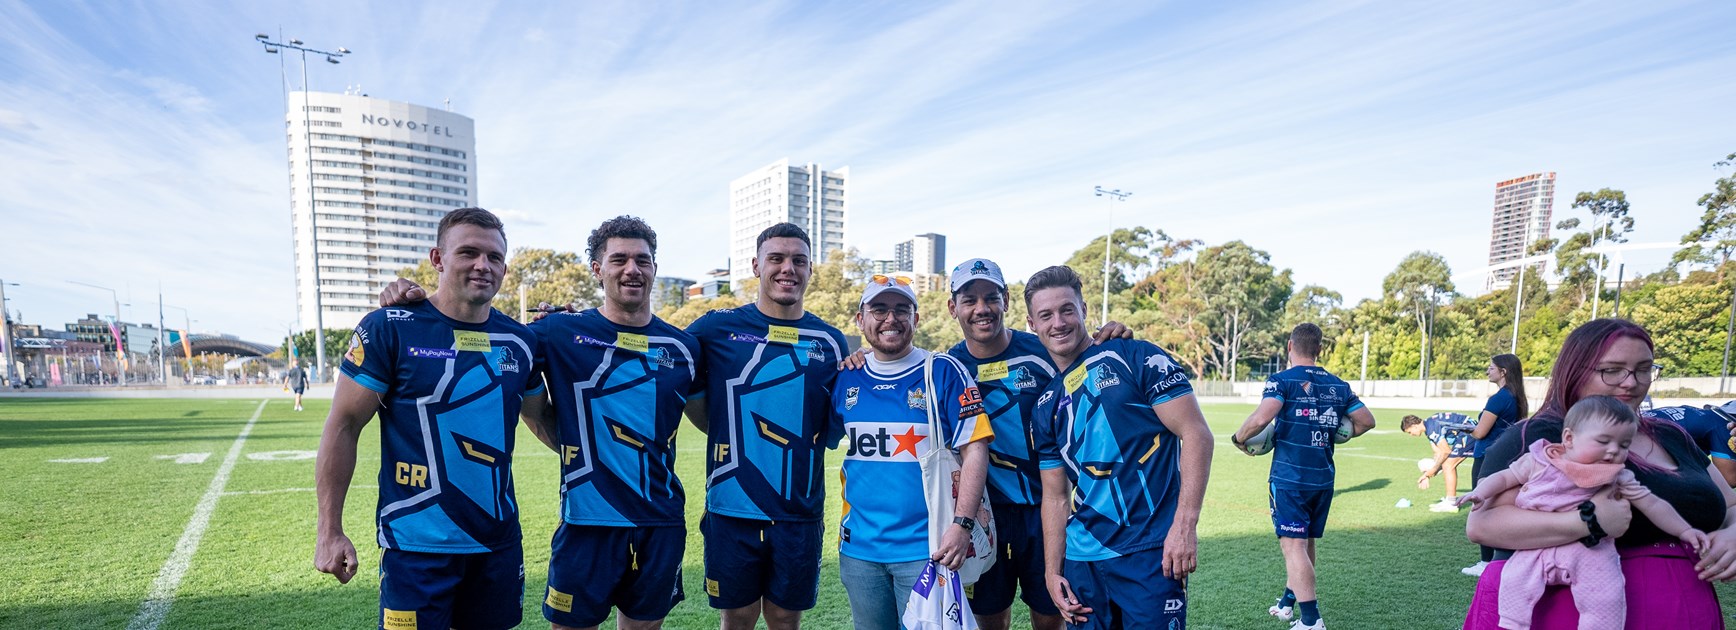 Meet the Titans in New Zealand before ANZAC Round